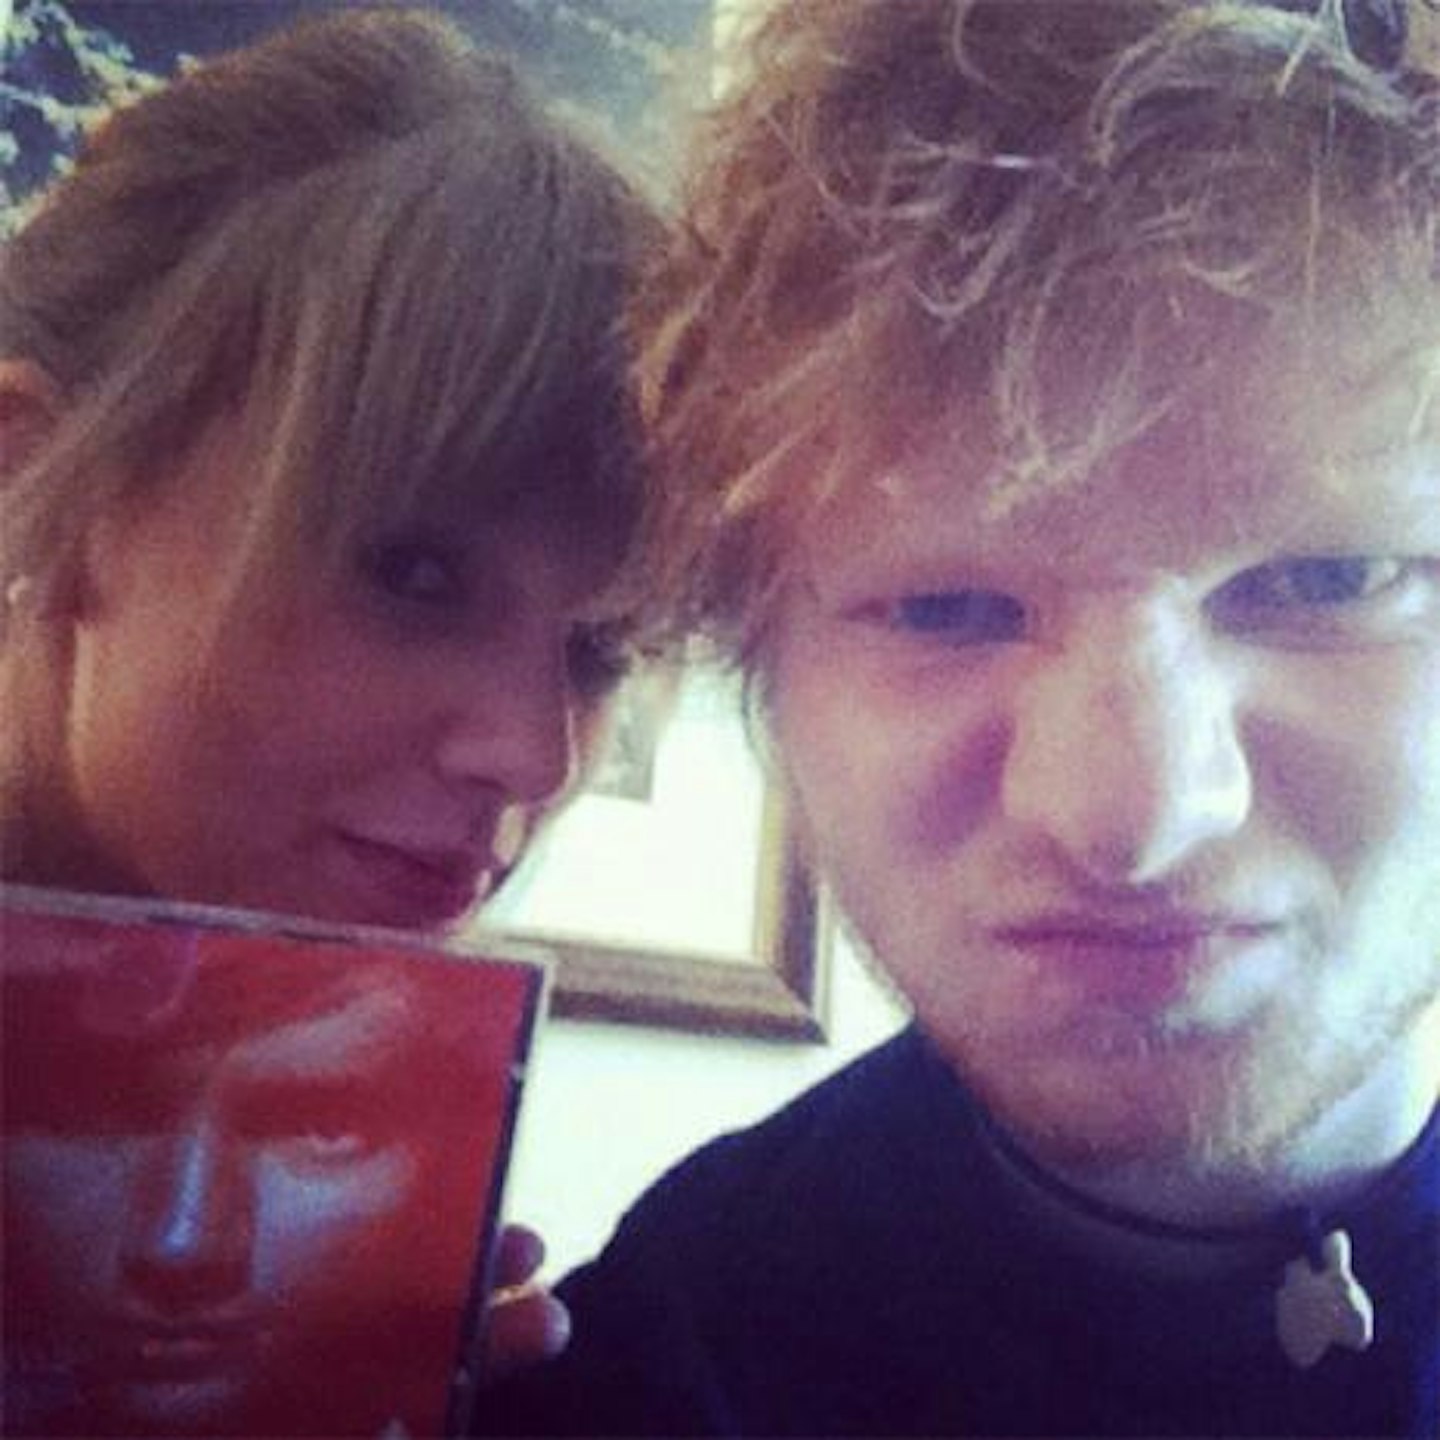 ed-and-taylor